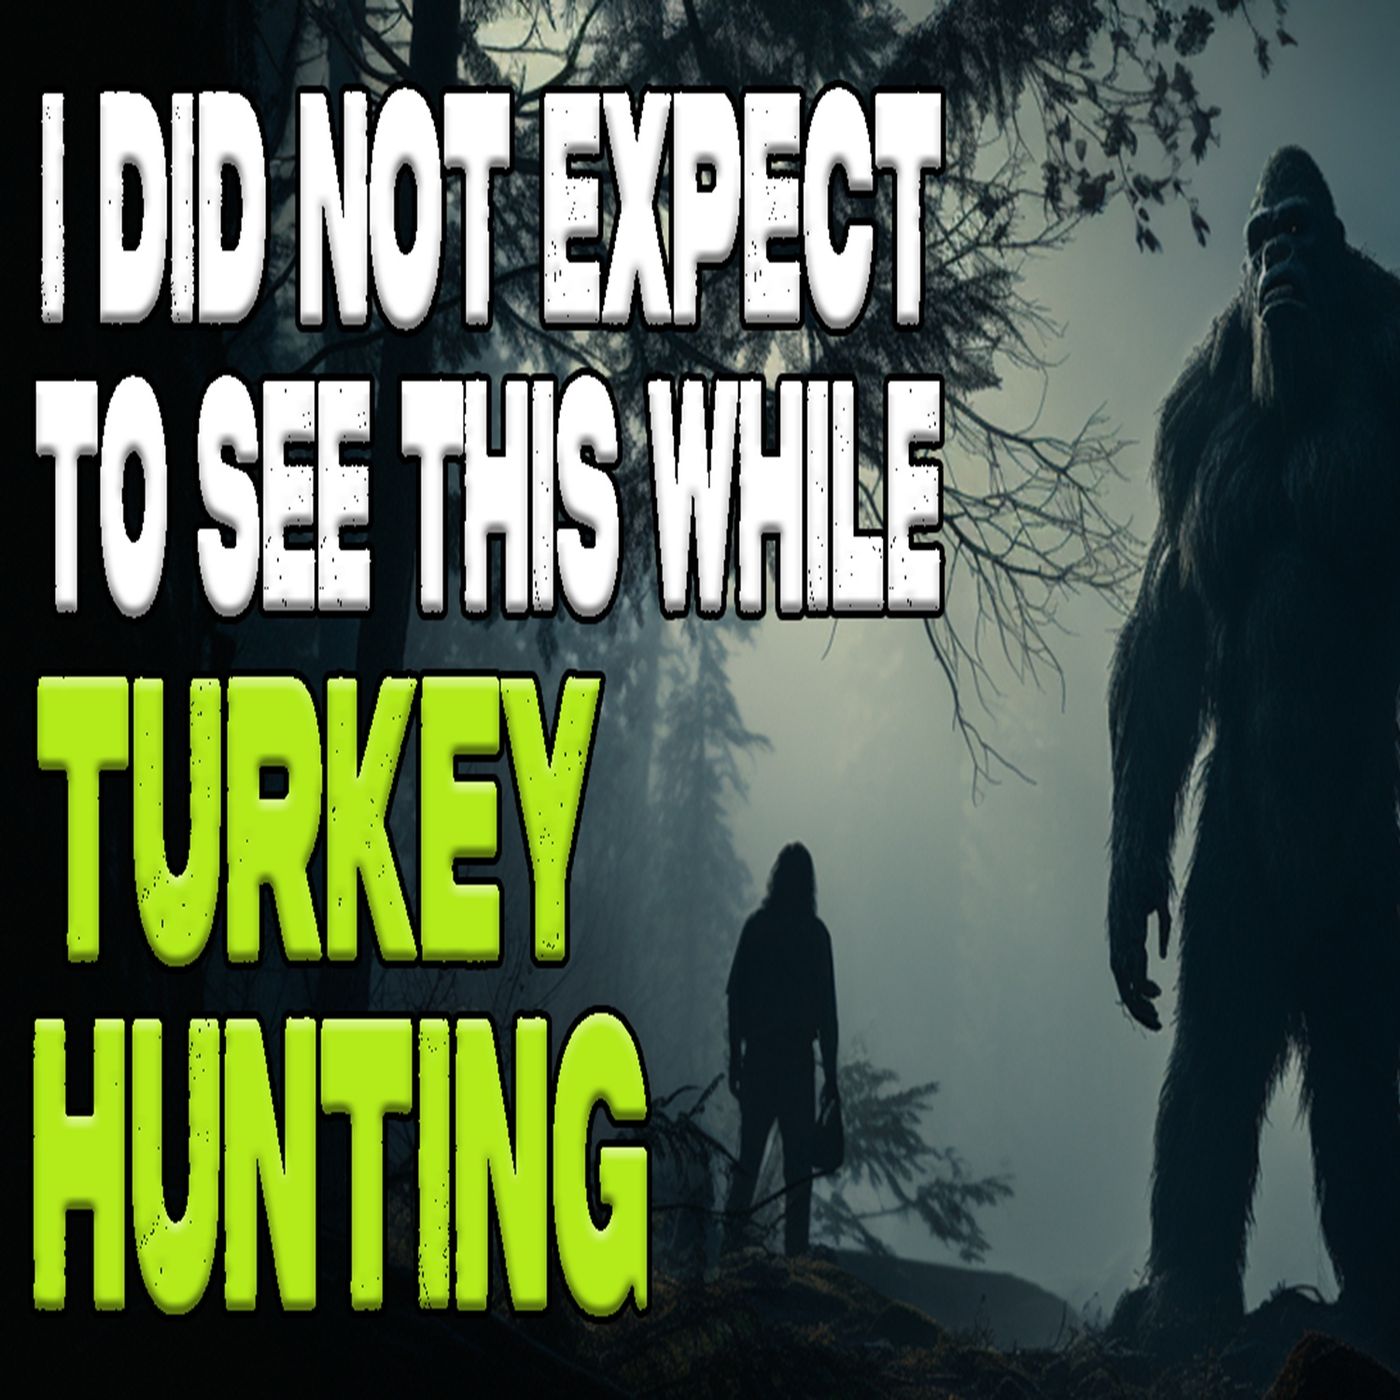 I Did Not Expect to See This While Turkey Hunting